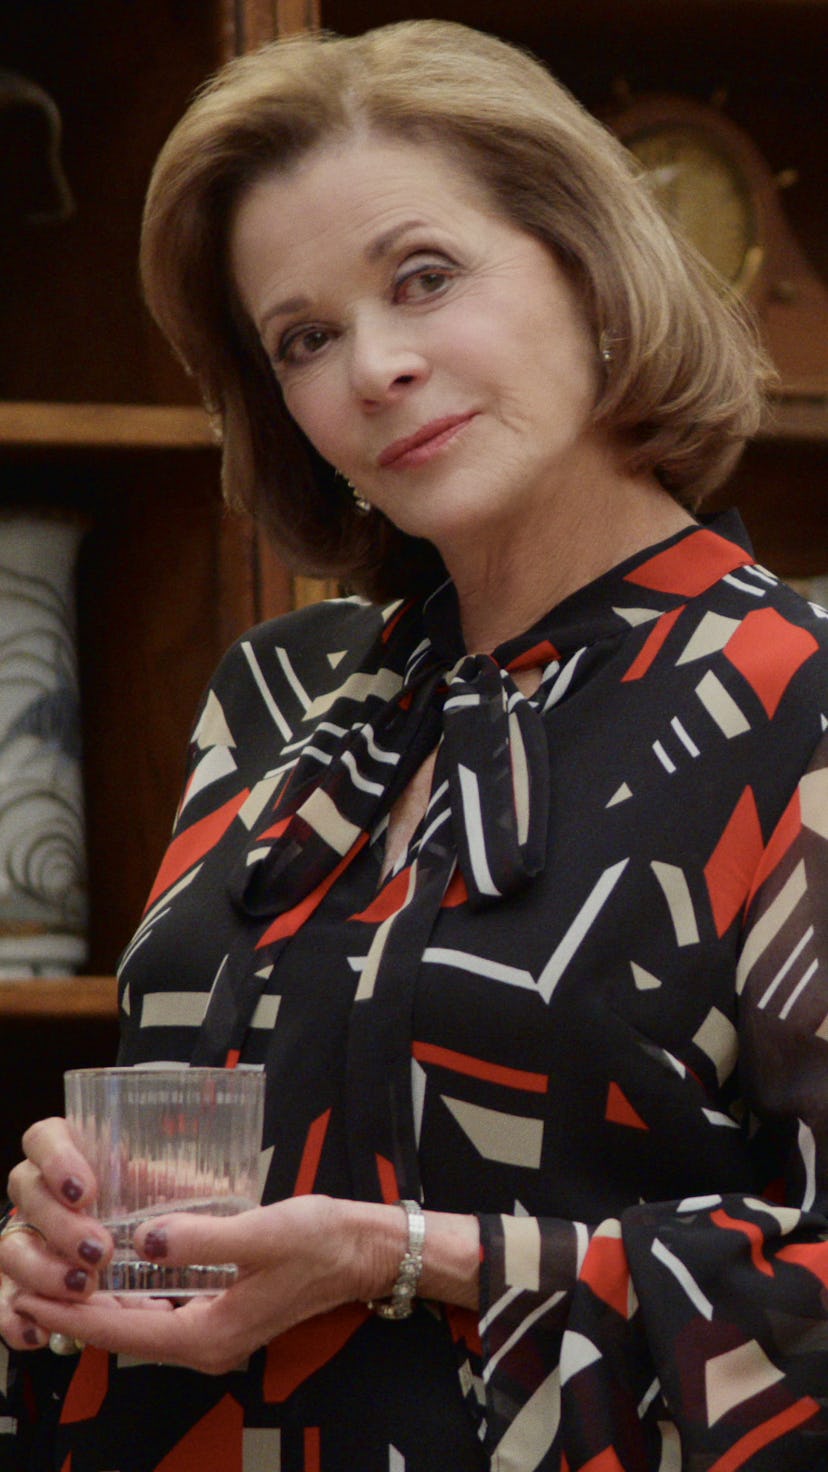 Lucille Bluth was played by Jessica Walter, who died on March 24 at age 80.